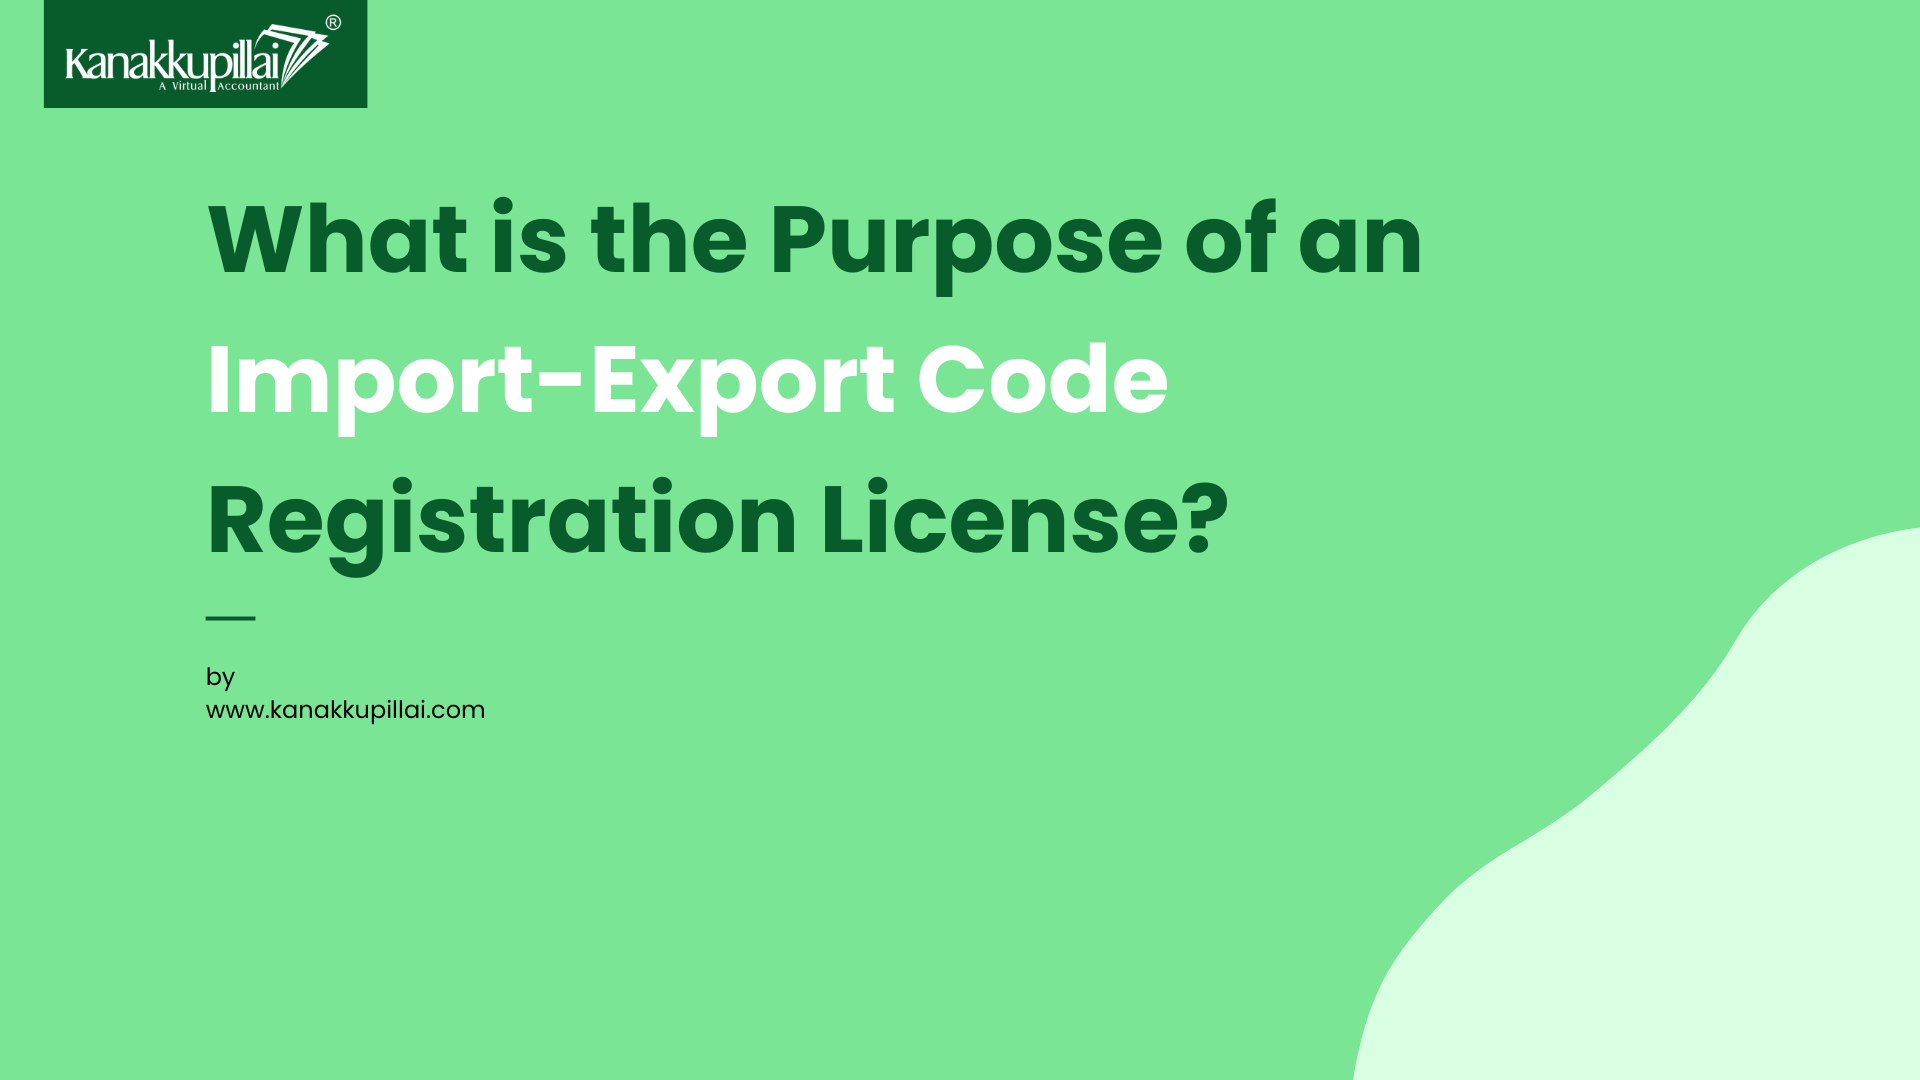 What is the Purpose of an Import-Export Code Registration License?